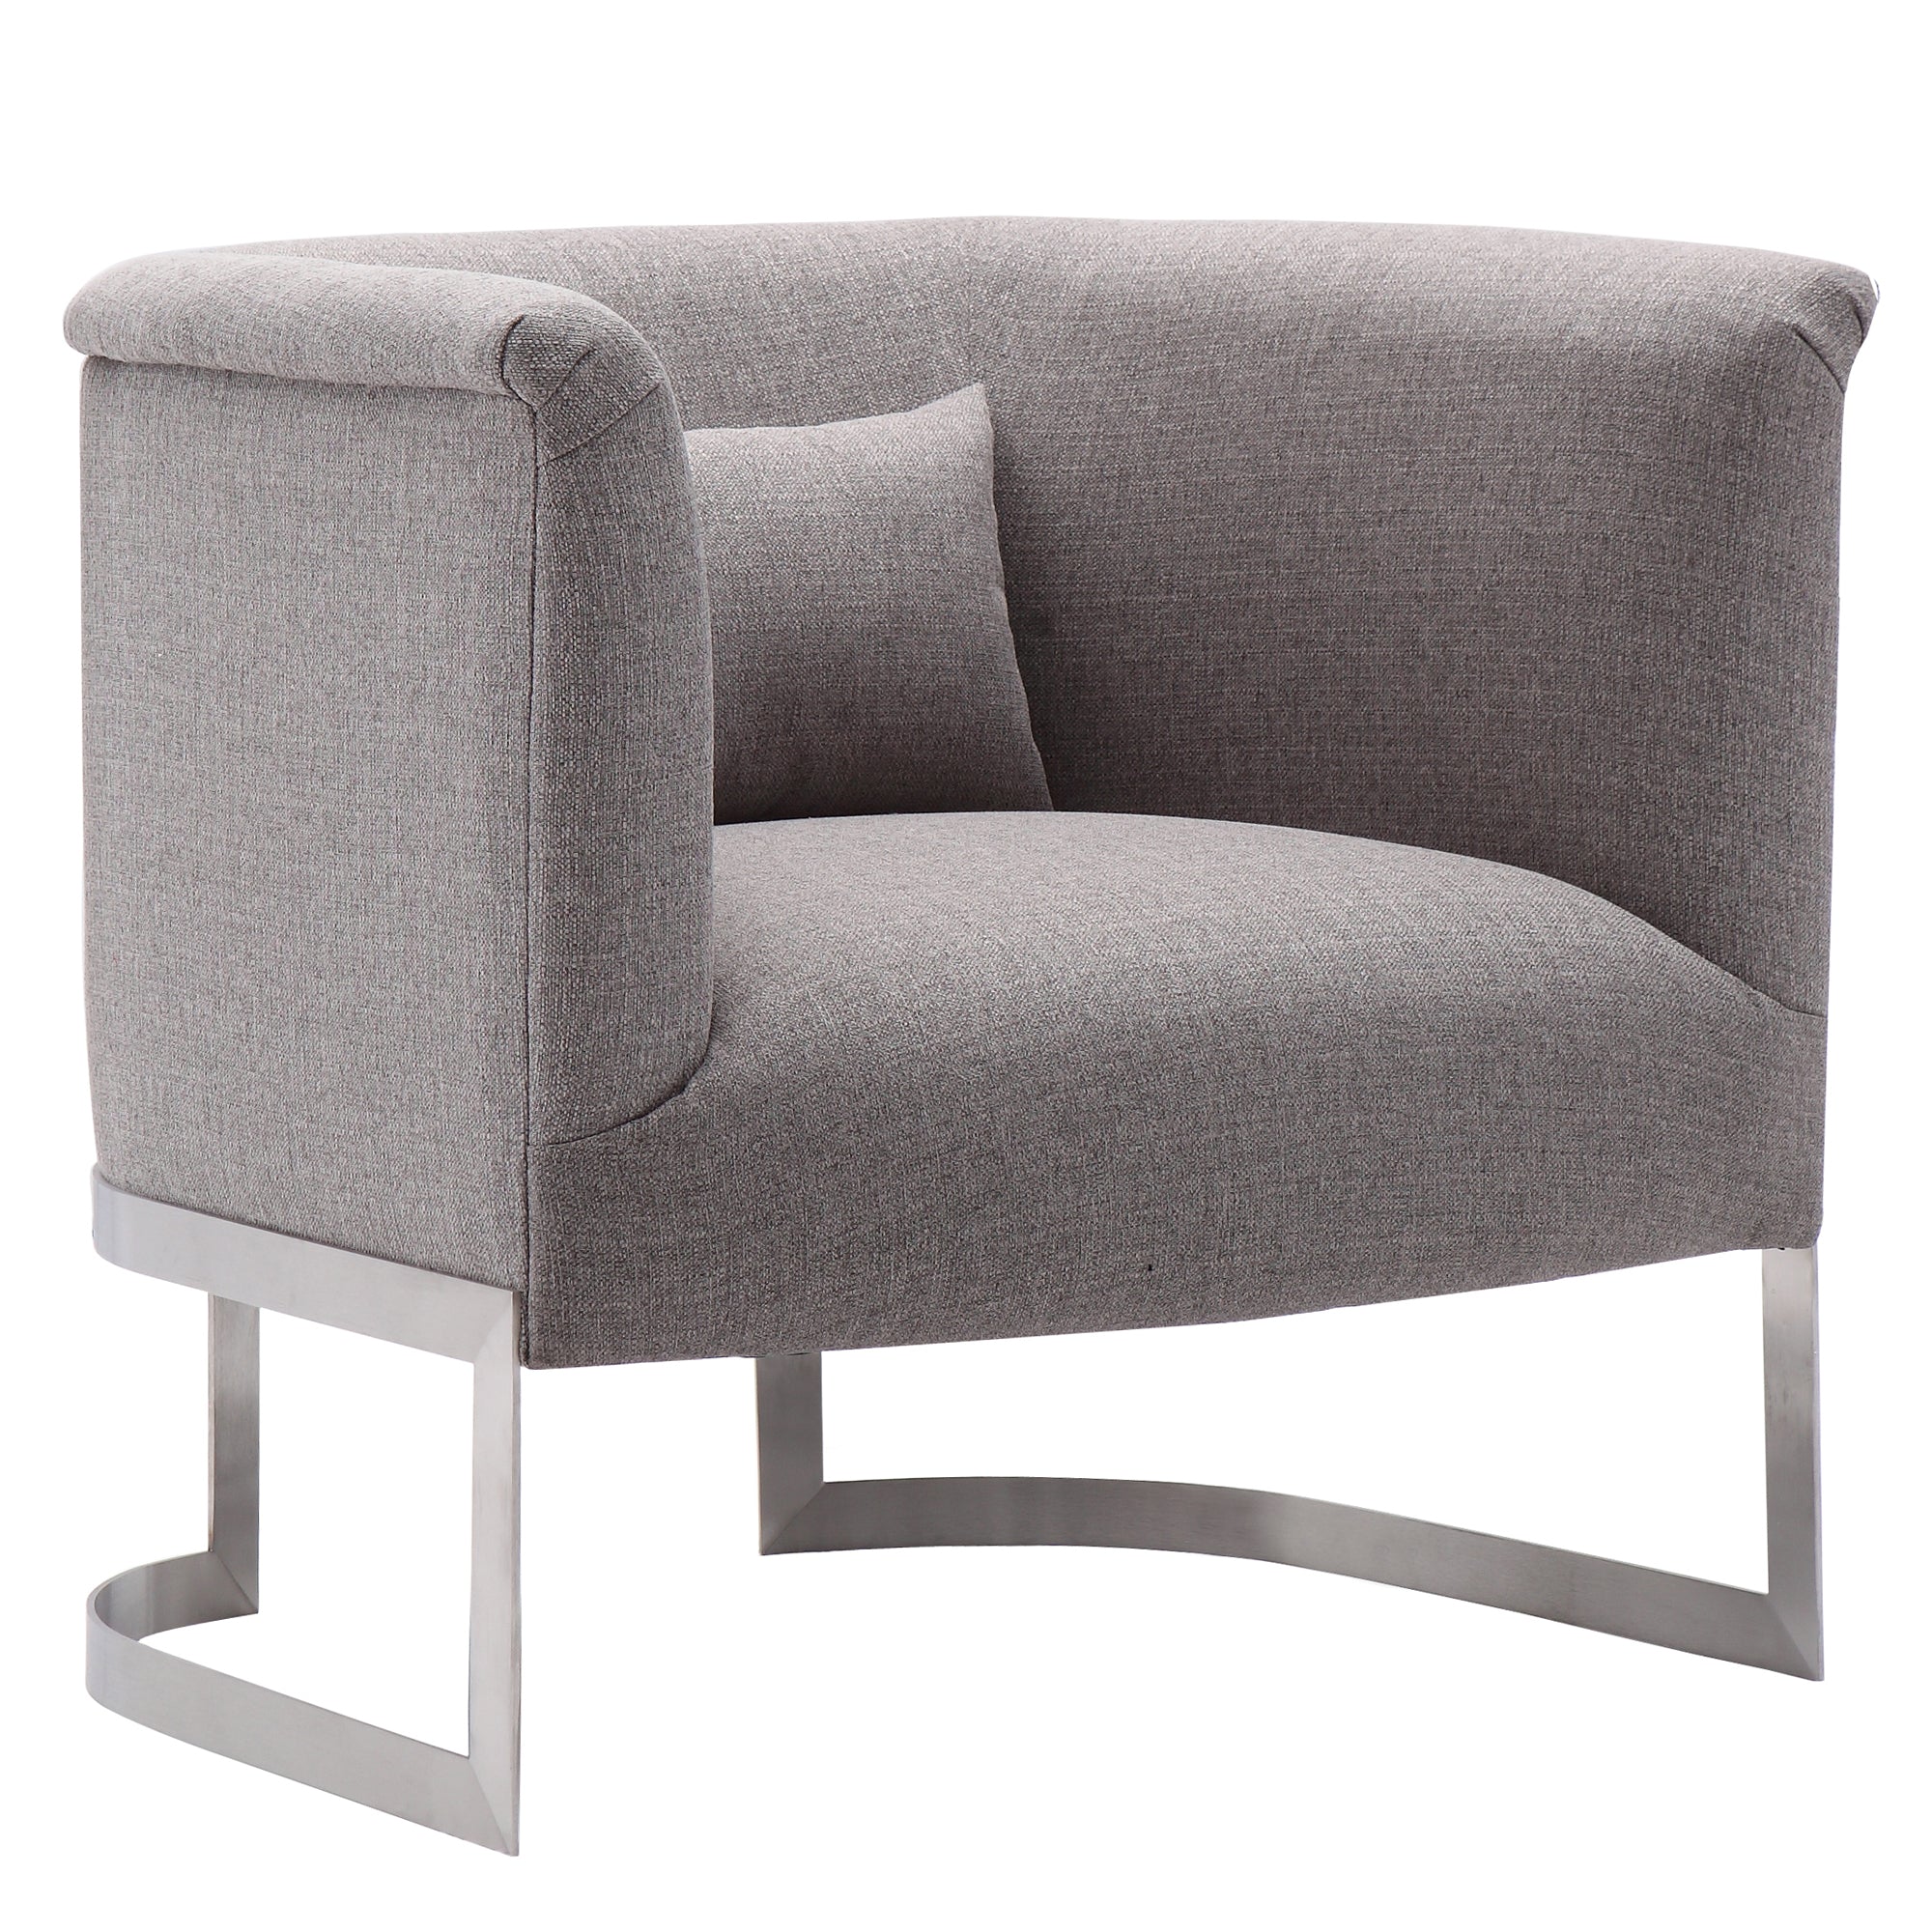 Armen Living Lc560chgr Elite Accent Chair In Brushed Stainless Steel Finish With Grey Fabric